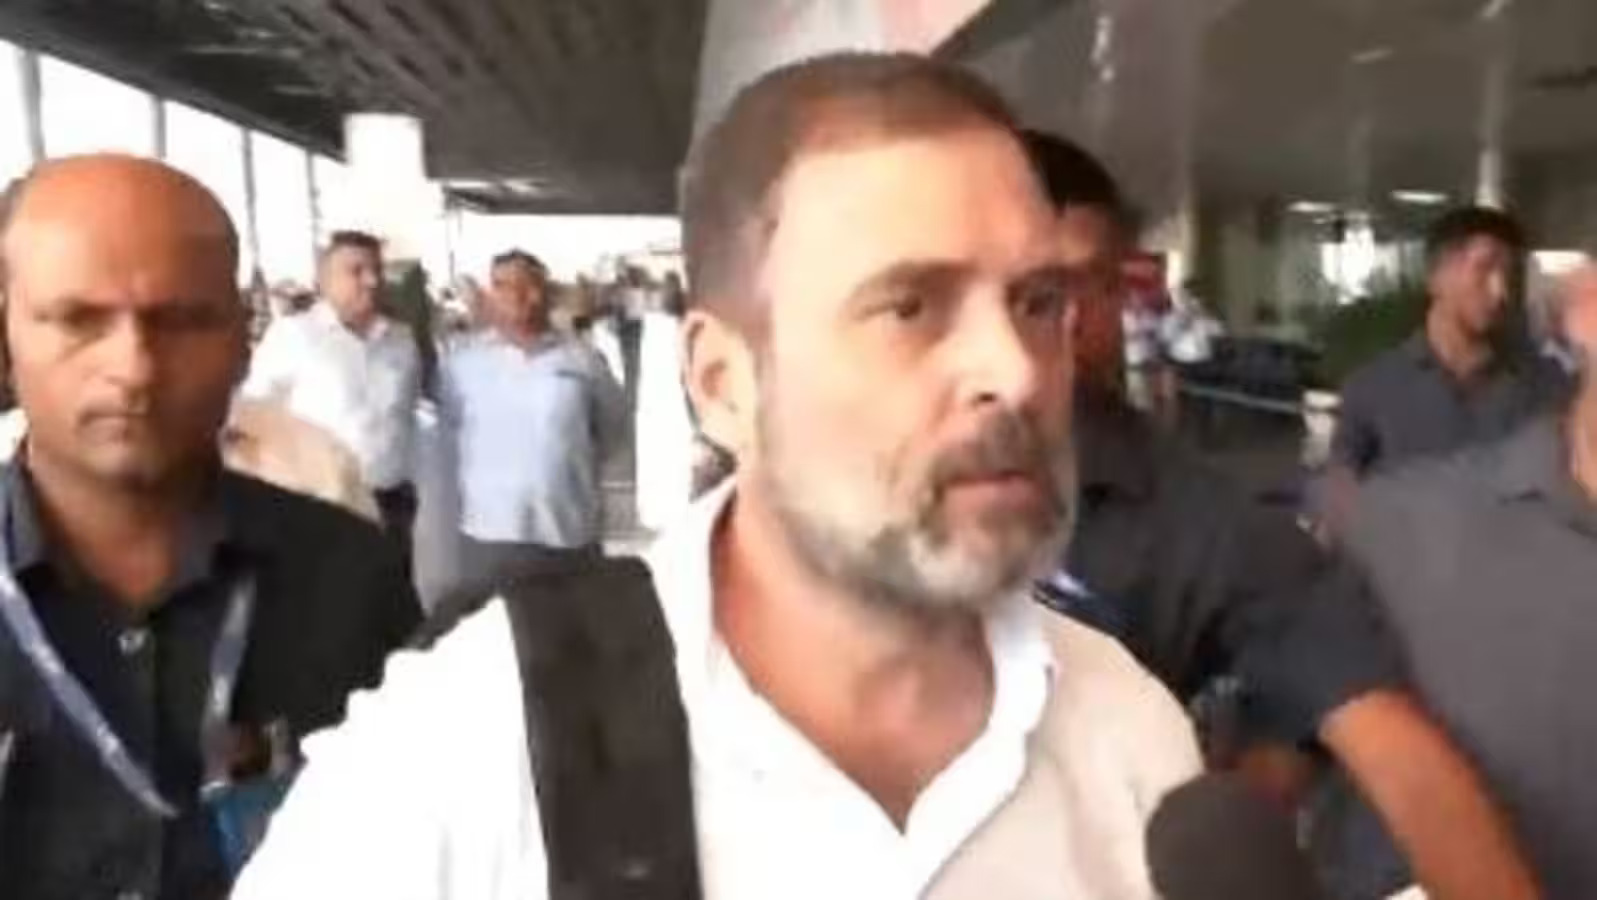 Rahul Gandhi Sets Off on a Week-Long European Tour Ahead of G20 Summit, Reports Say